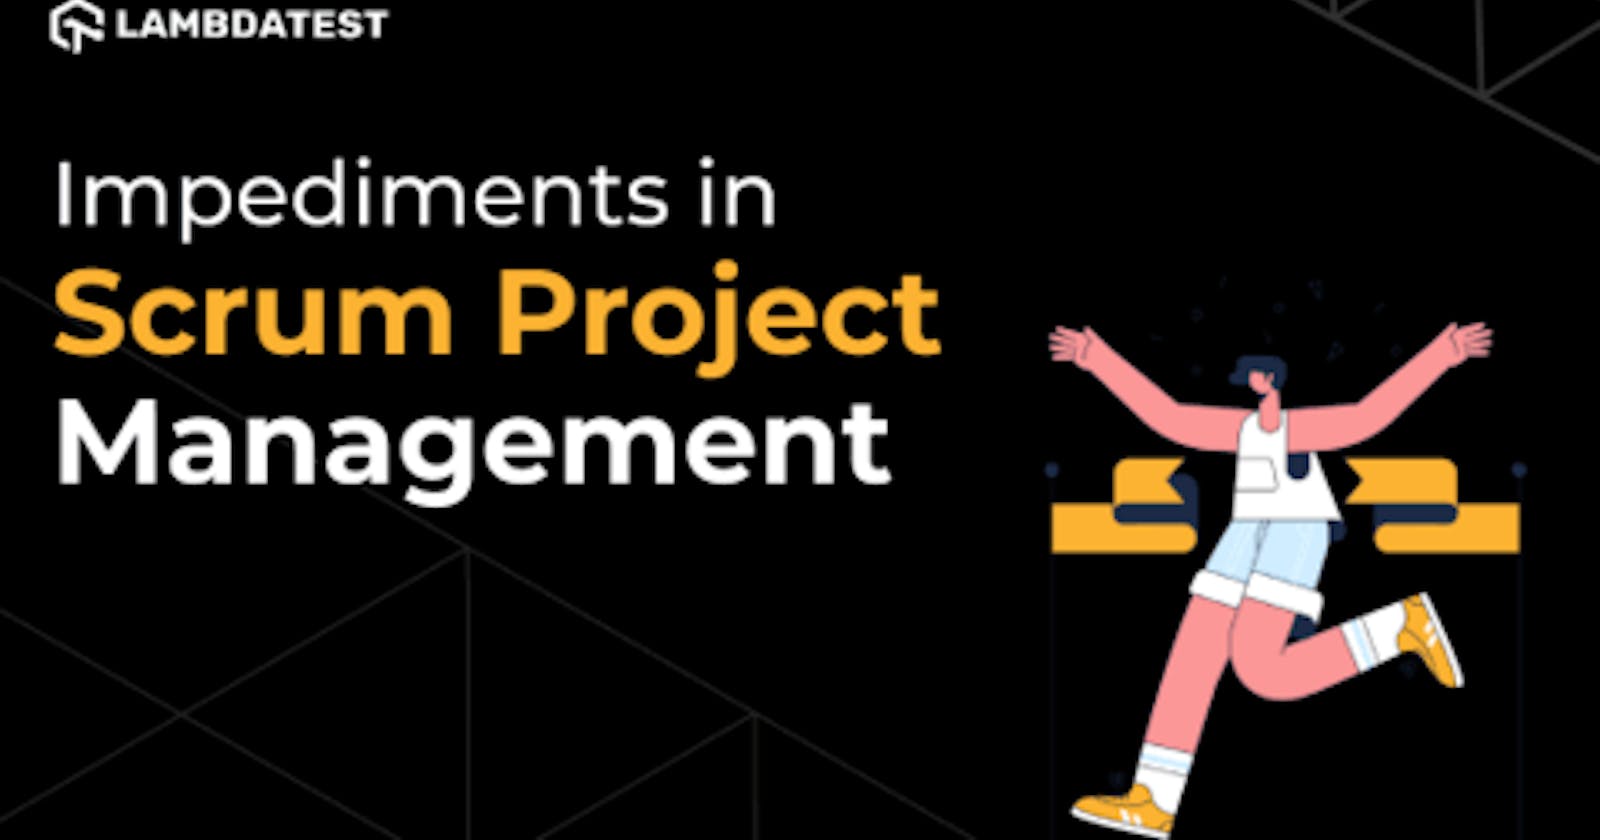 Impediments in Scrum Project Management